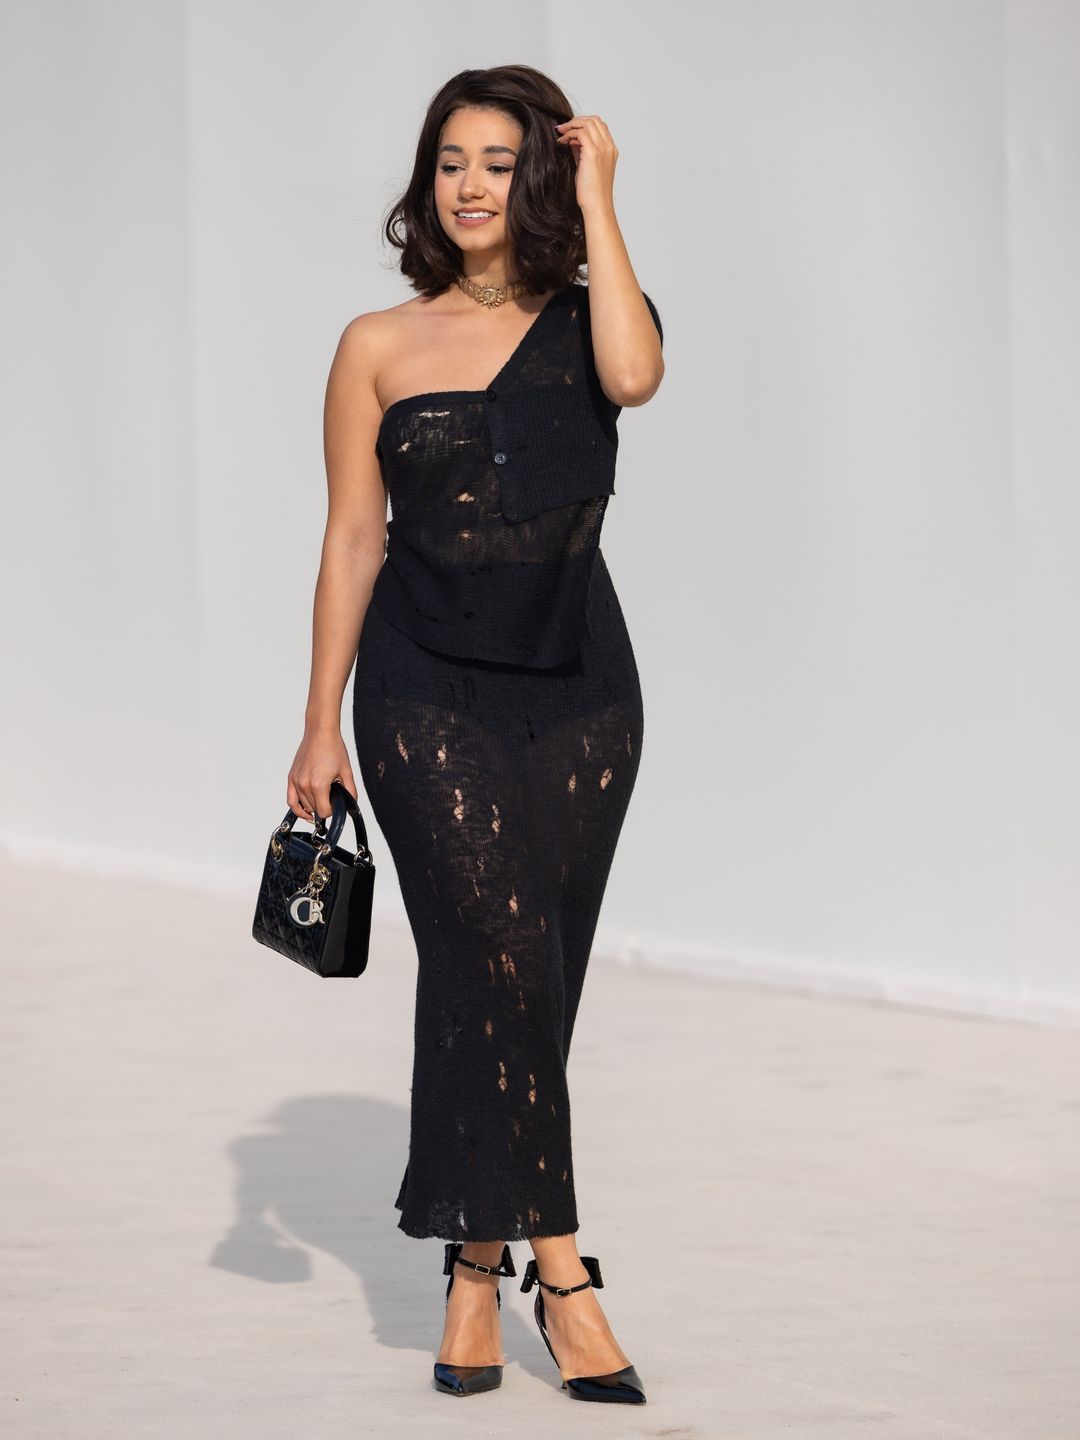 Lena Mahfouf attends the Christian Dior show in a black knit dress and heels